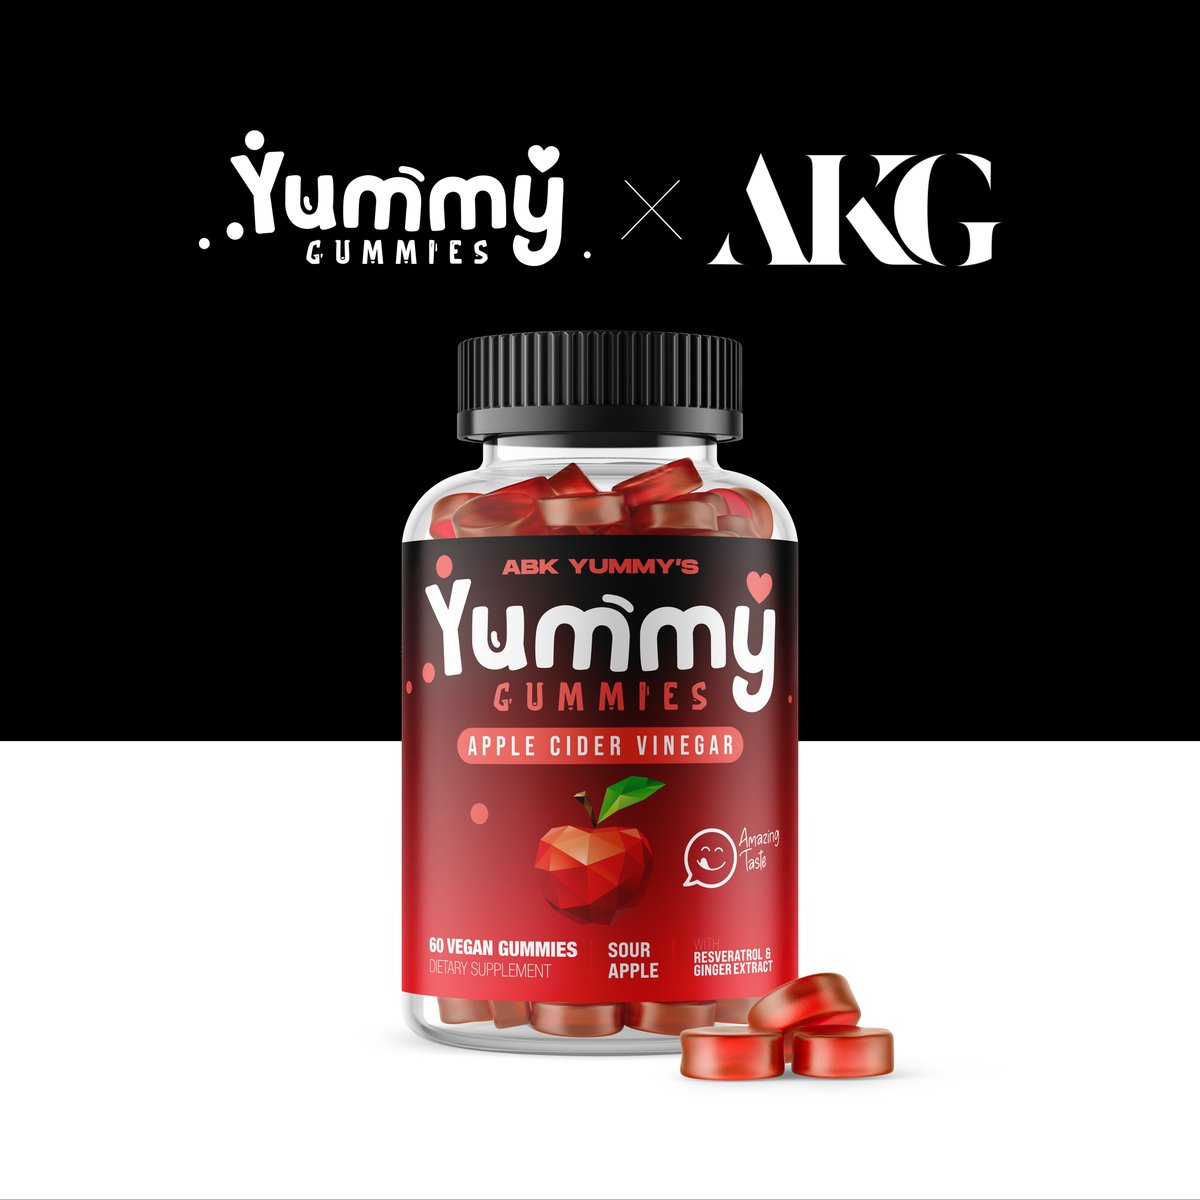 Shaking up the nutritional gummies market! 🚀 Teaming up with an innovative manufacturer, we're blending clinically studied ingredients with full control over branding and marketing. Get ready for a game-changing wellness experience! #YummyGummies #PackagingDesign 💪🌟